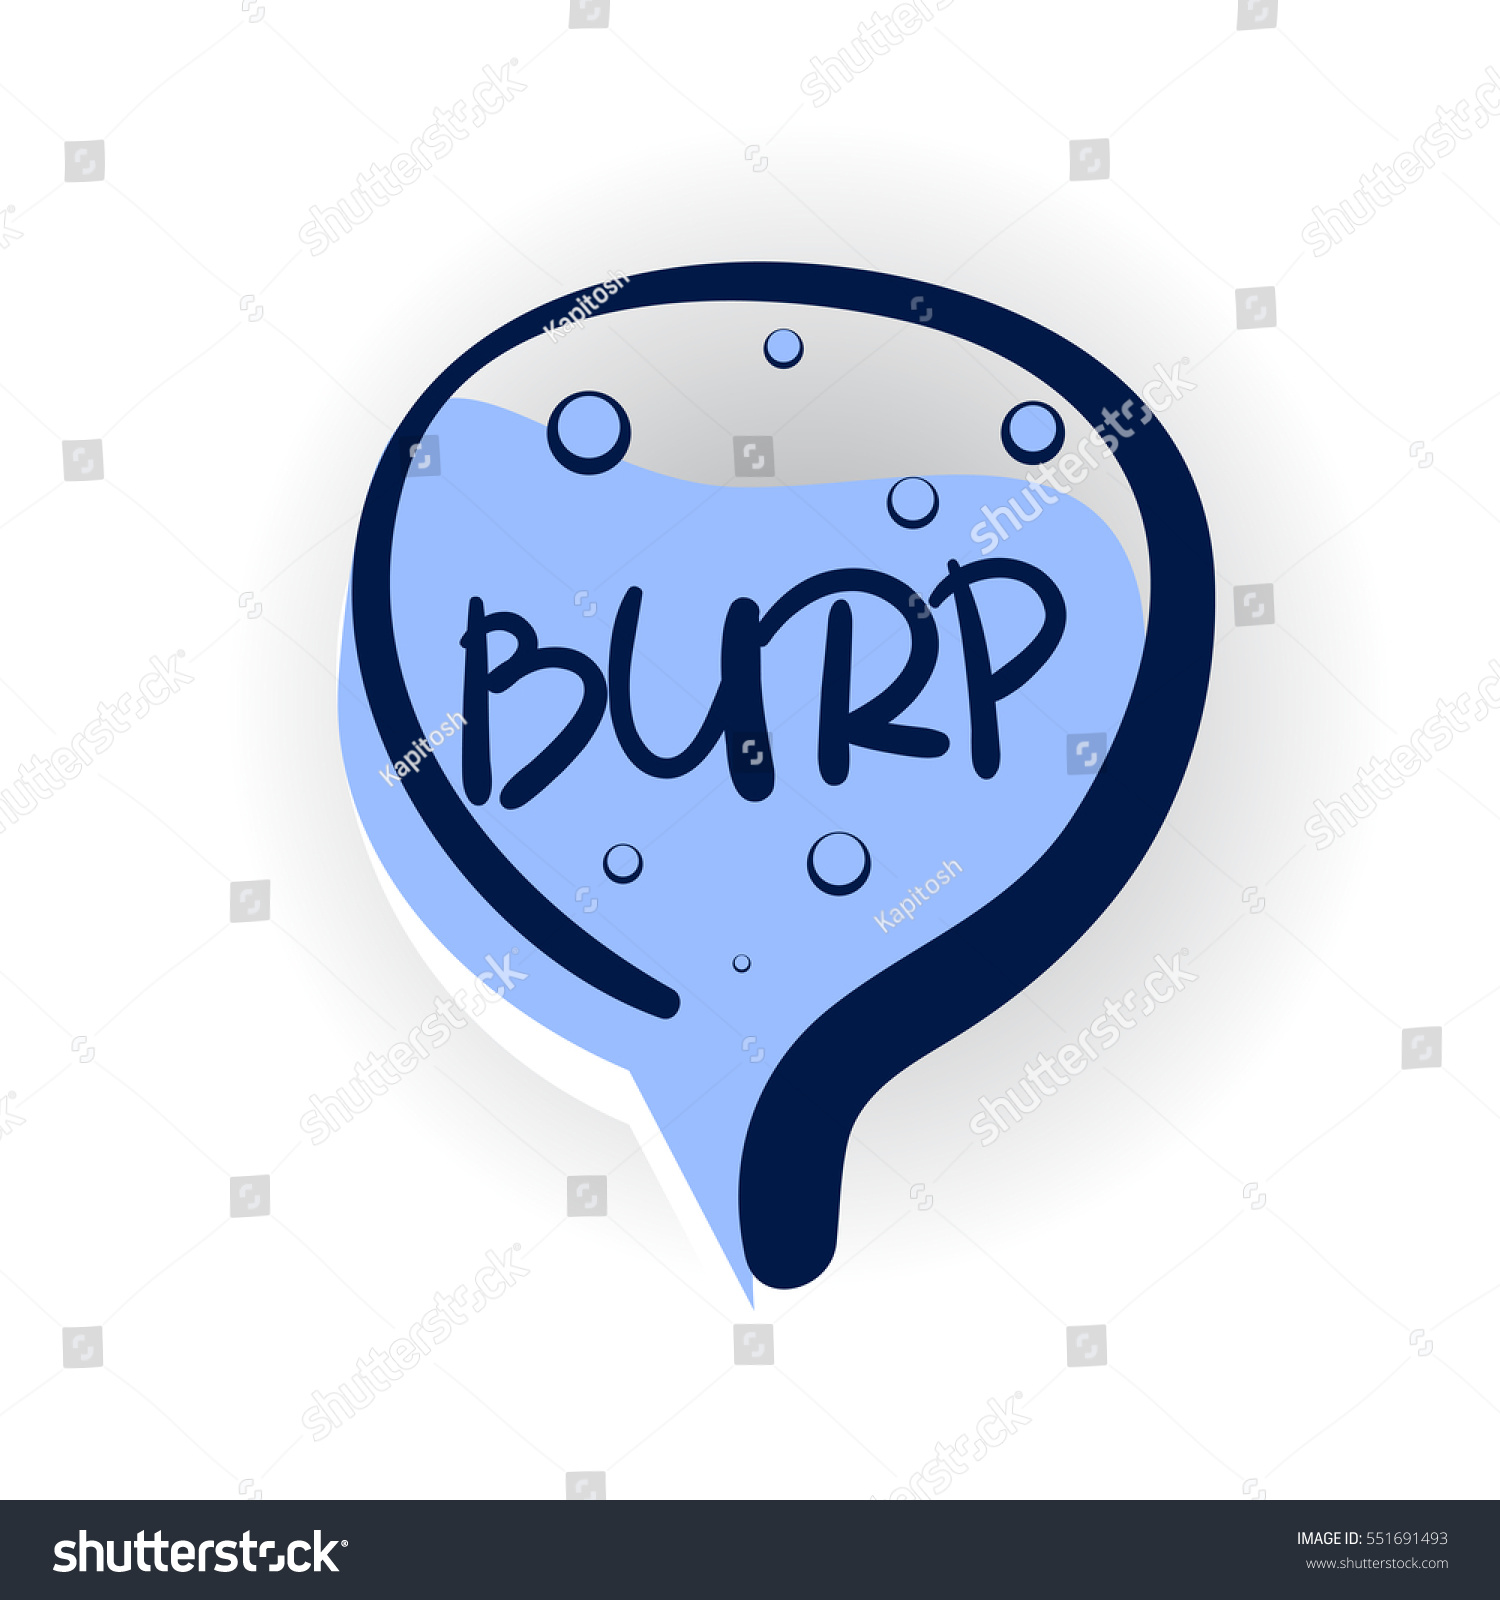 Burp - Android Apps 